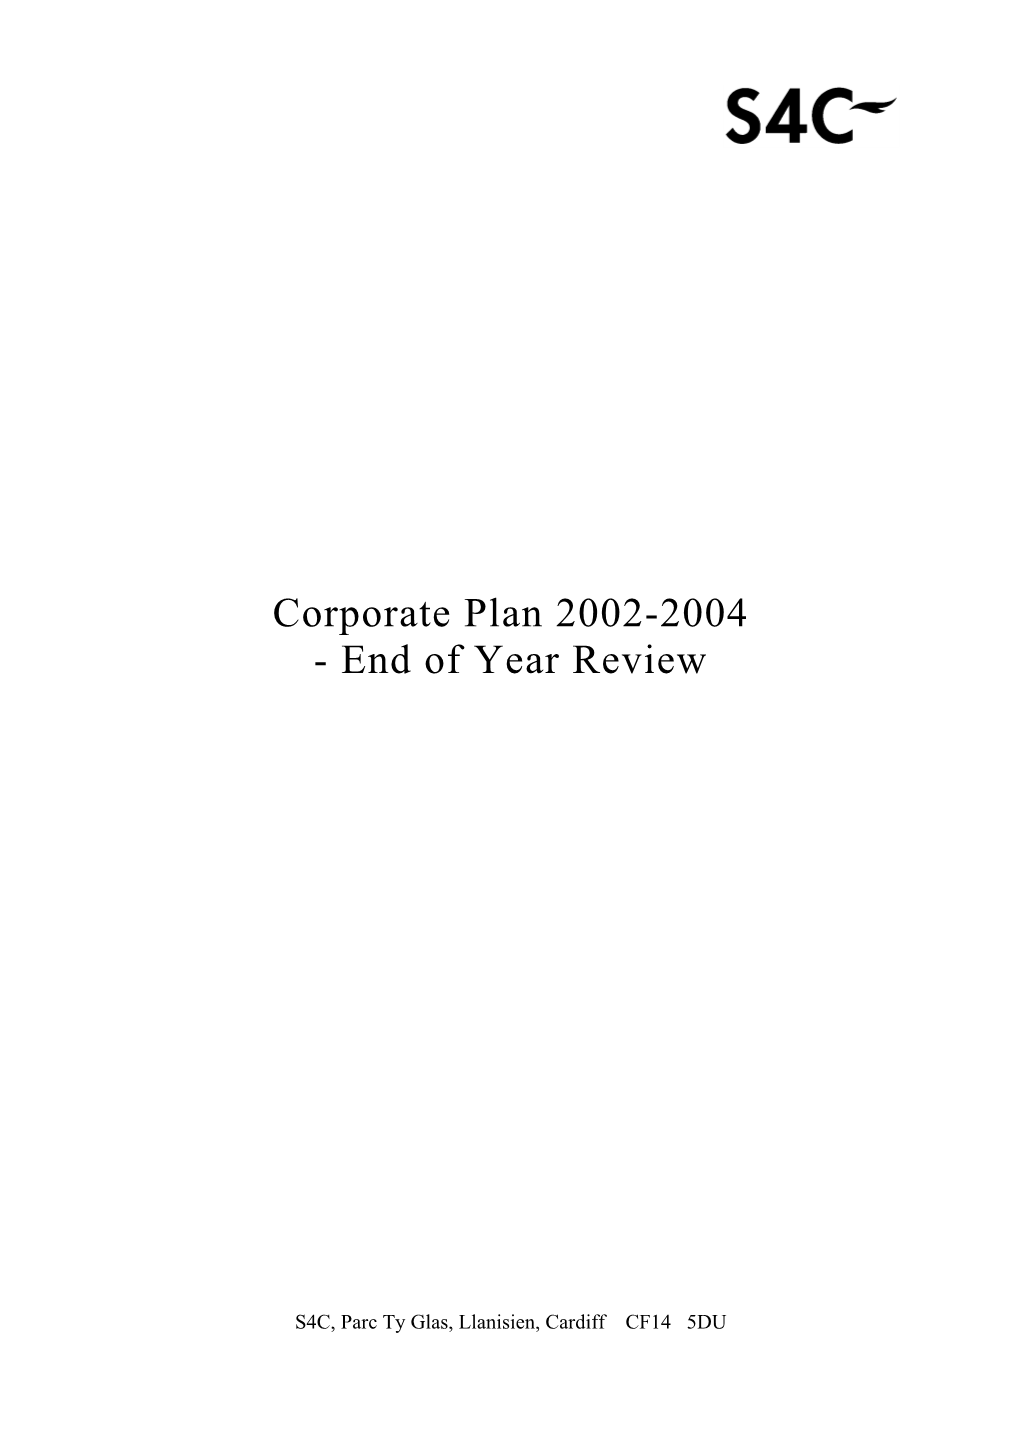 Corporate Plan 2002-2004 - End of Year Review